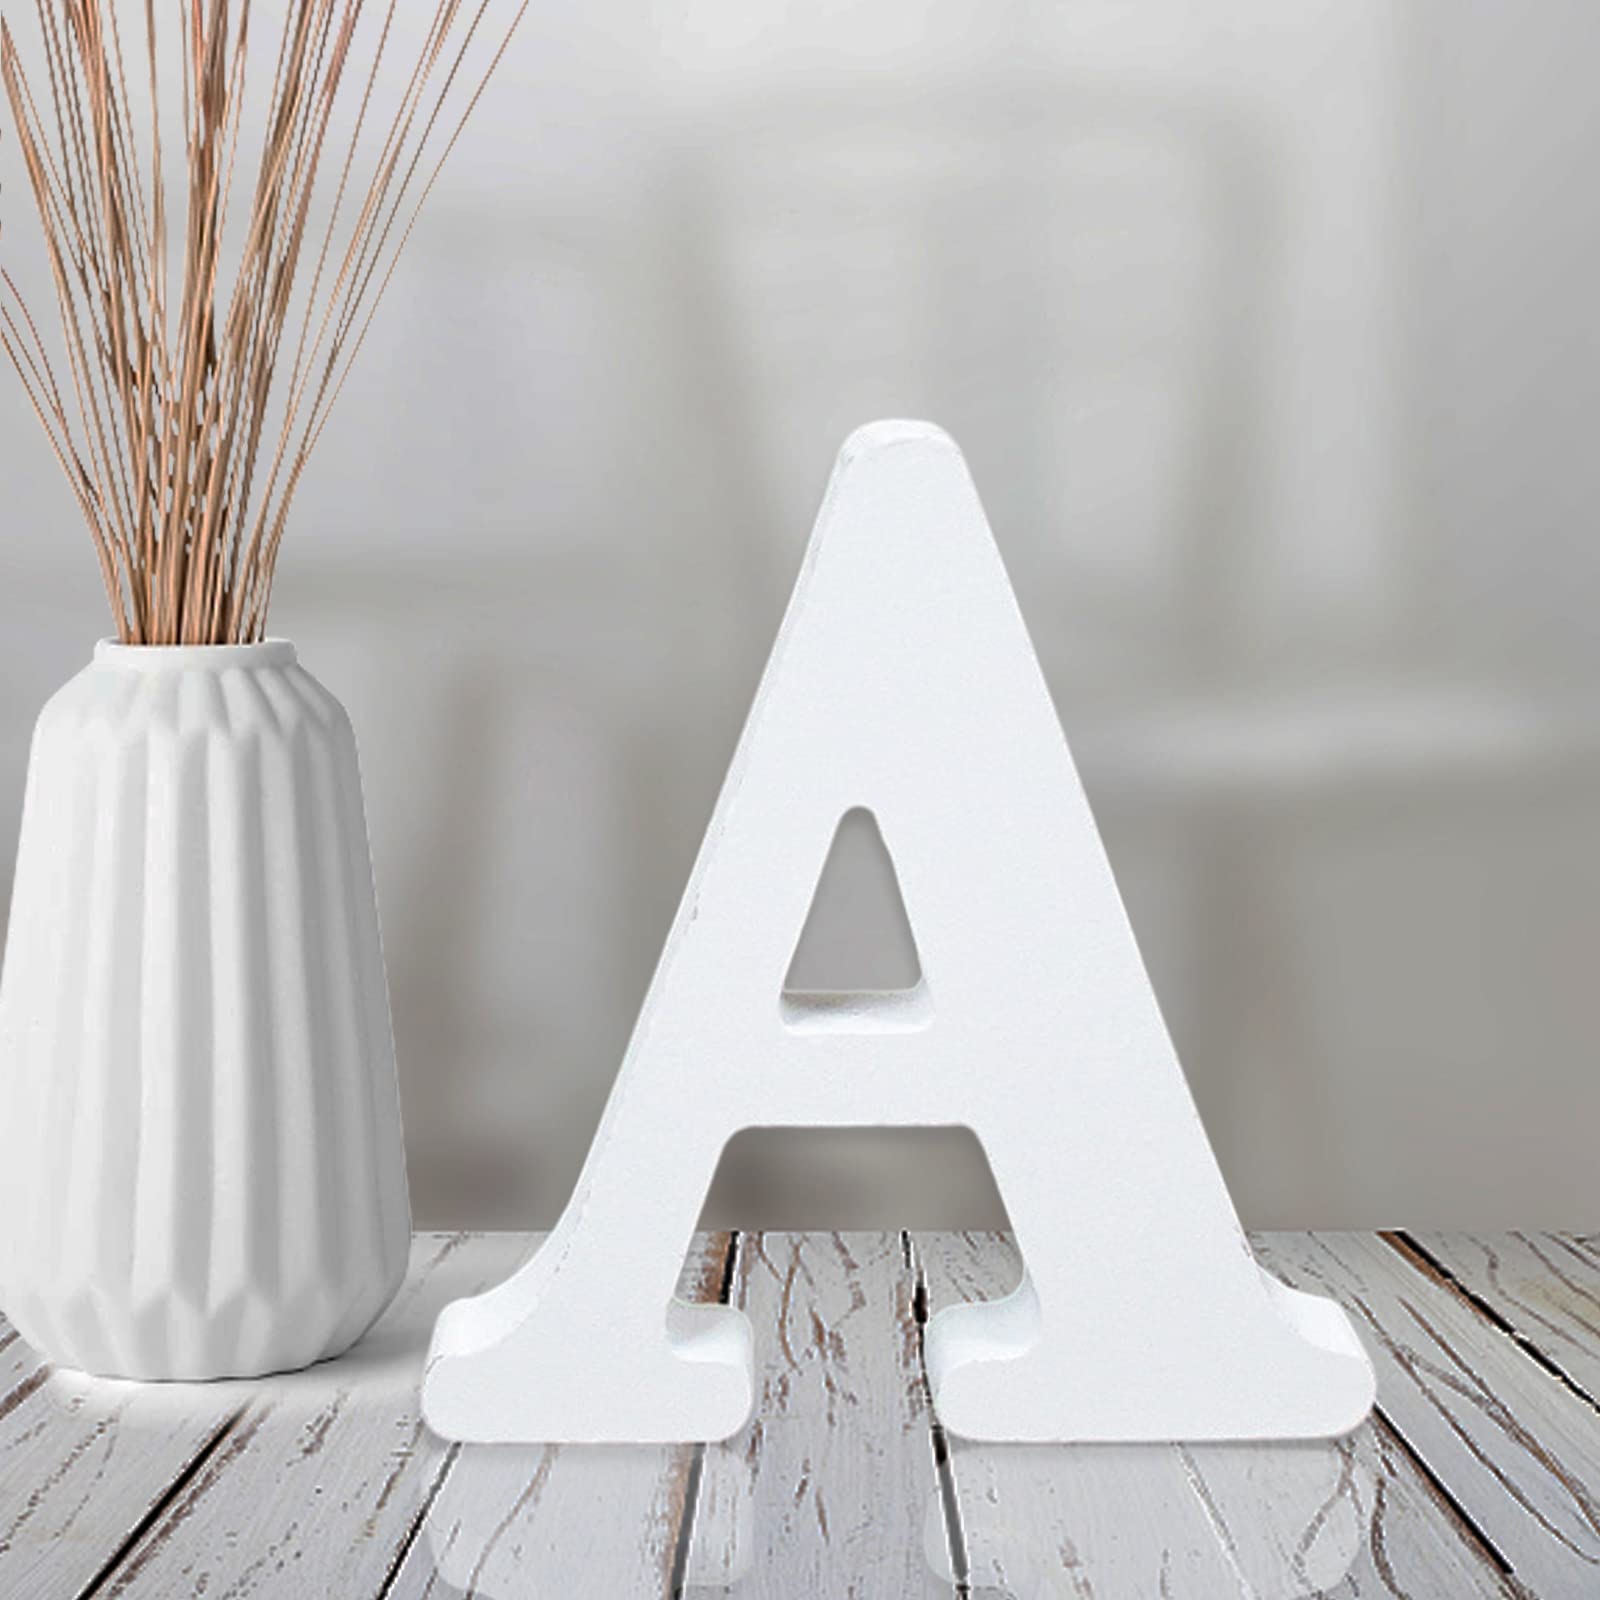 White Wood Letters 4 inch, Wood Letters for DIY Party Projects (I)